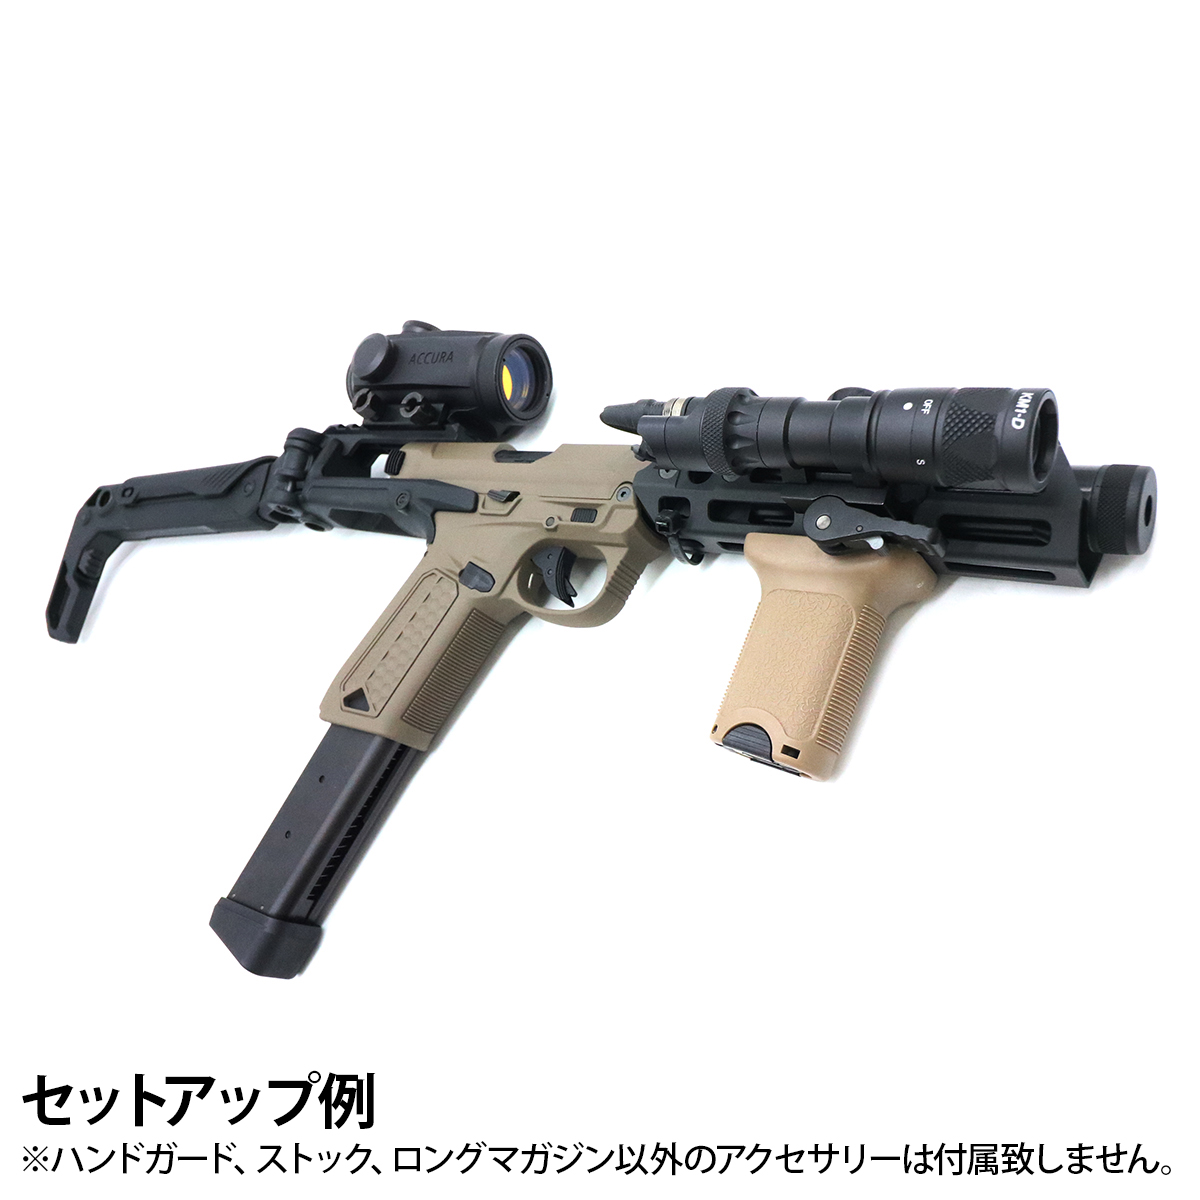 ACTION ARMY AAP01 セットアップ例